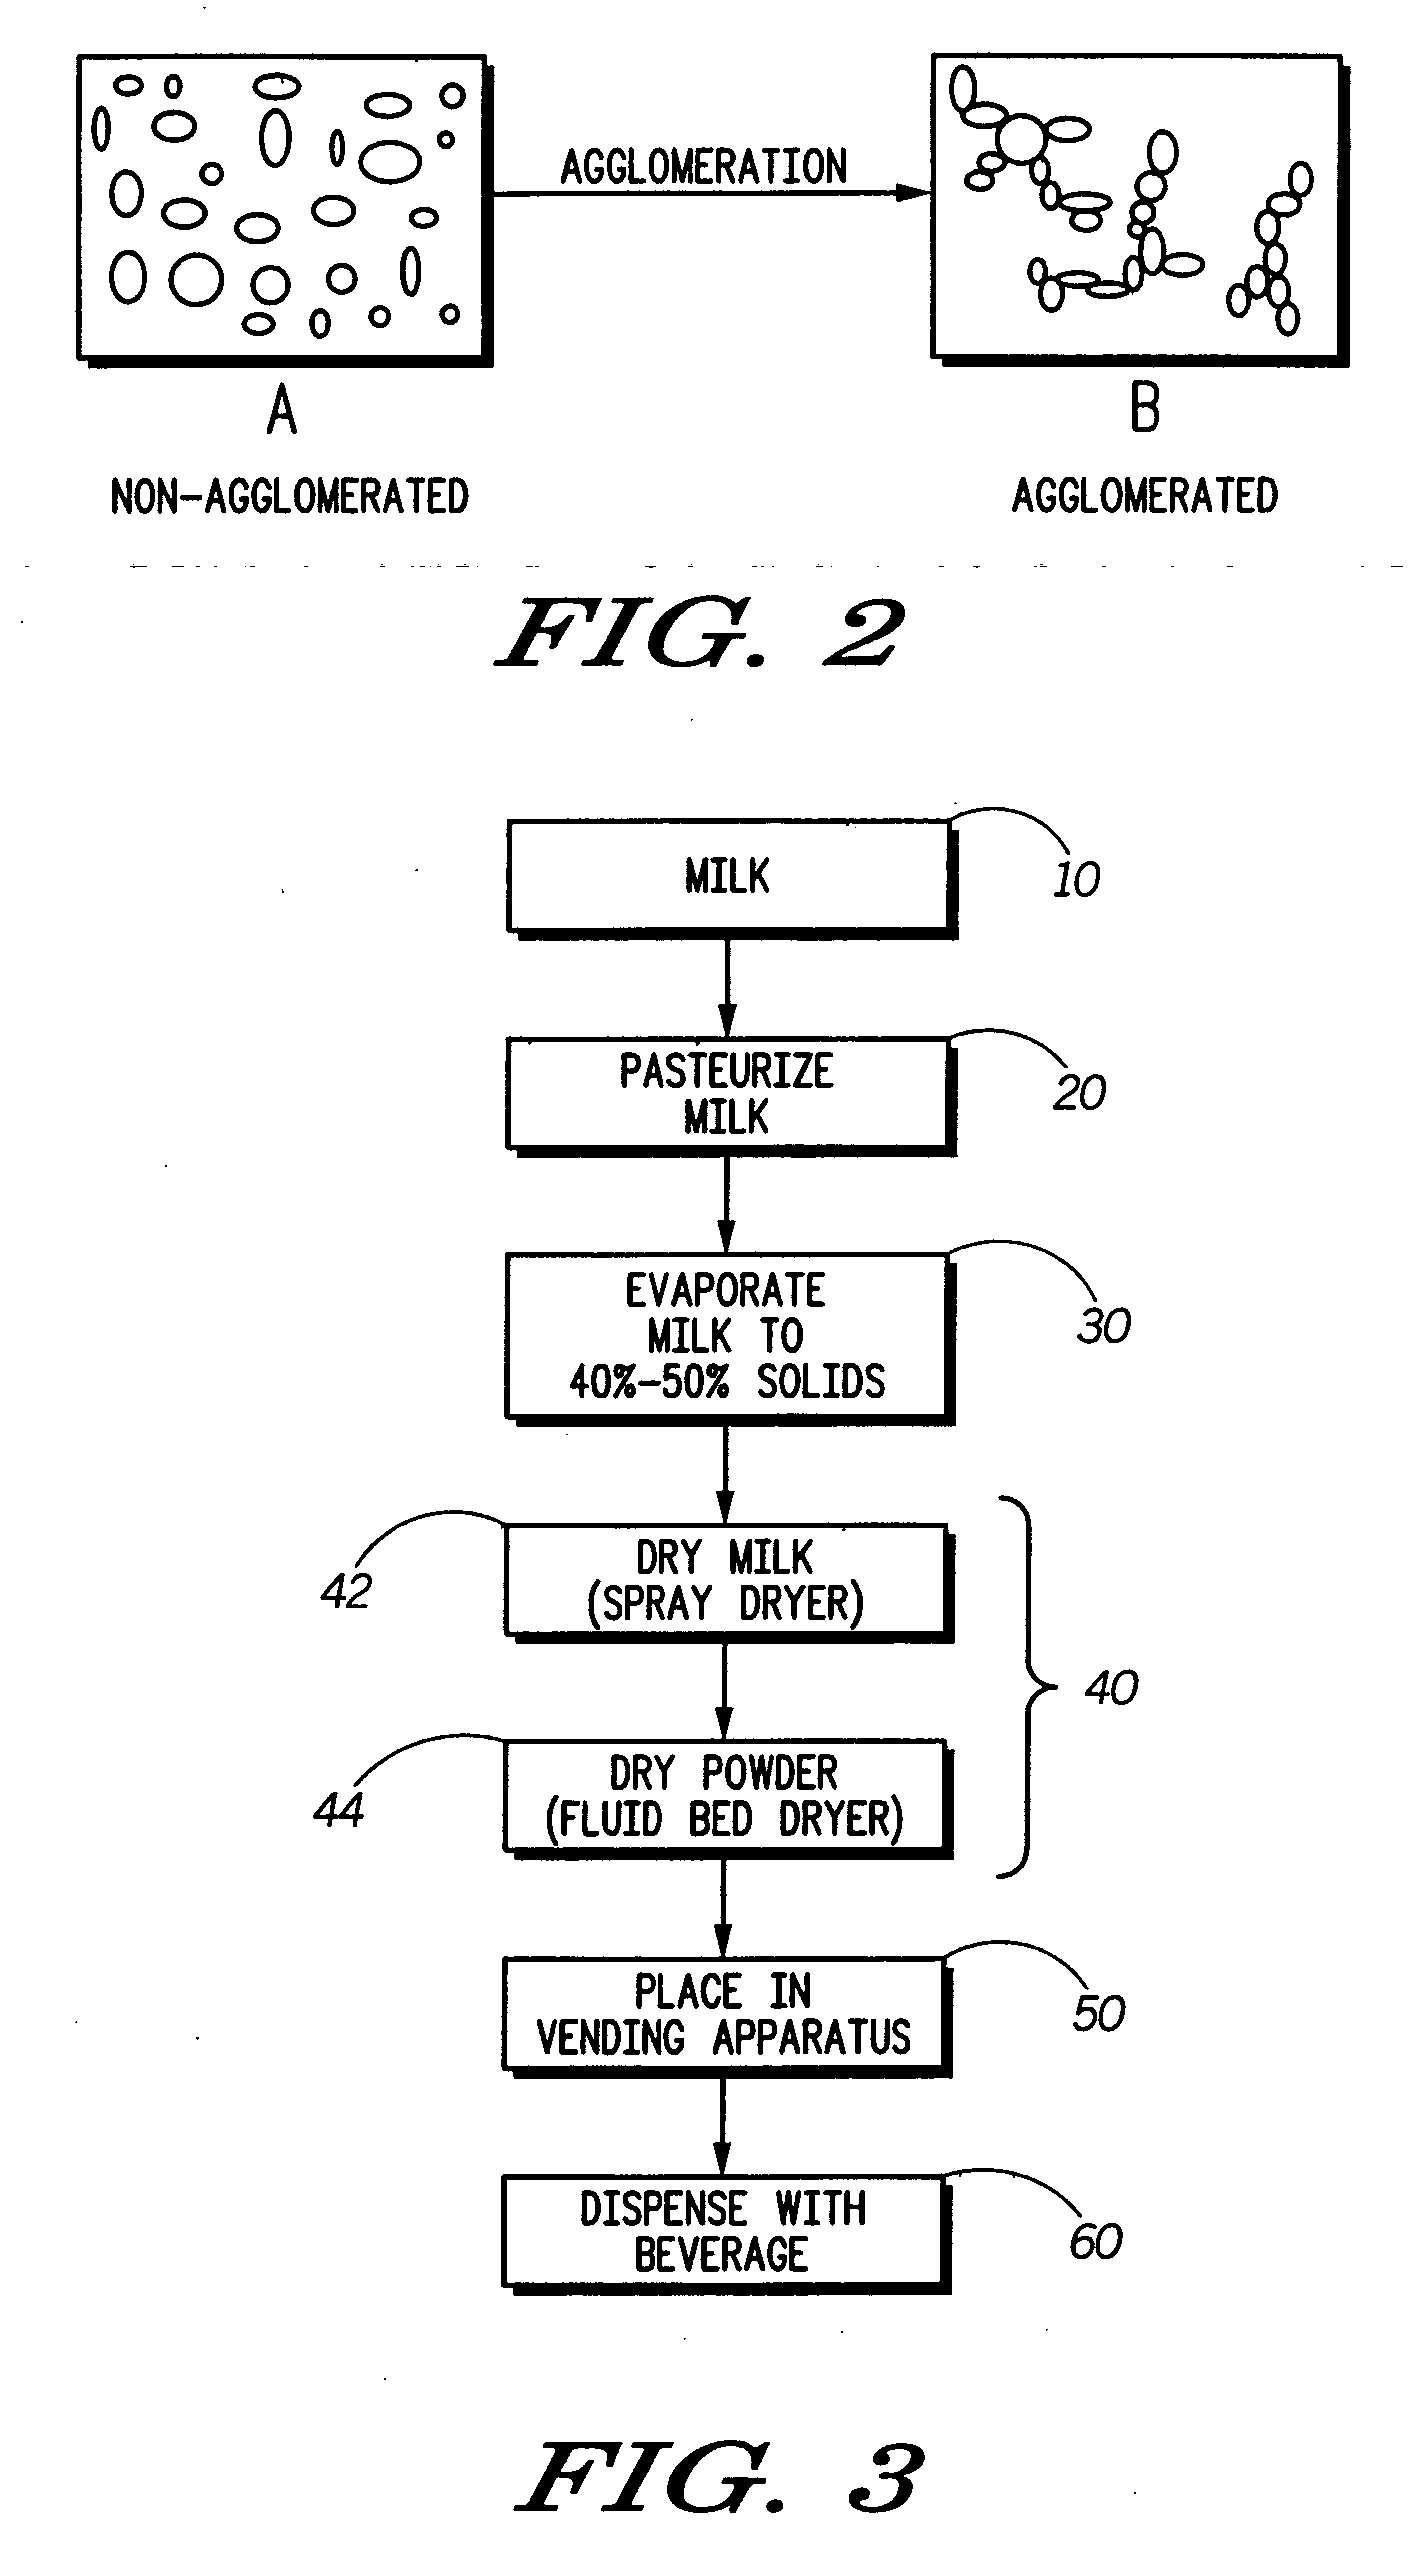 Method and apparatus for preparing a consumable beverage